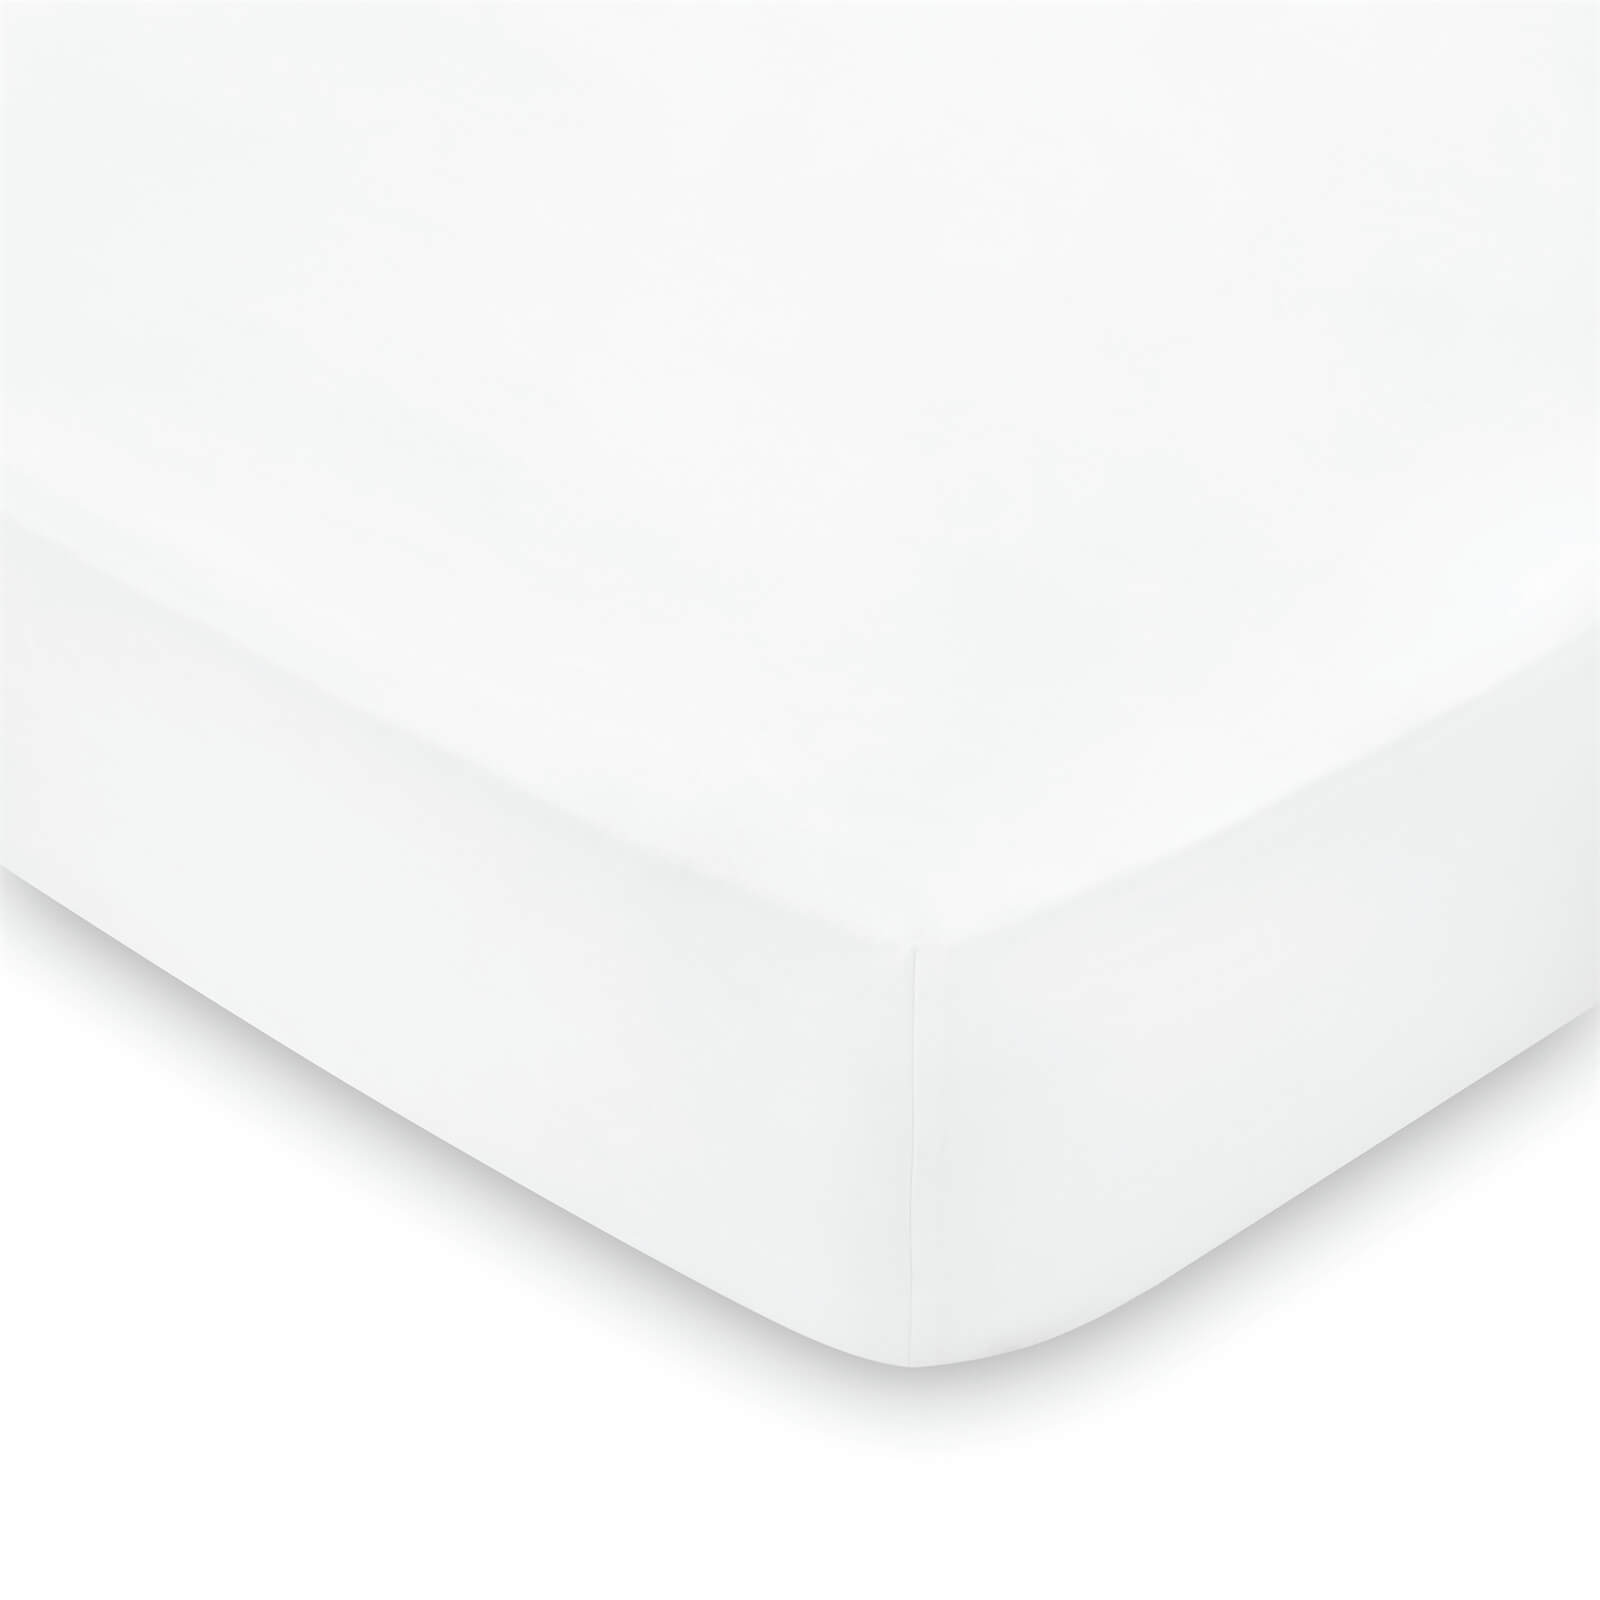 Peacock Blue Hotel 600 Thread Count Plain Dye Fitted Sheet - Double - White